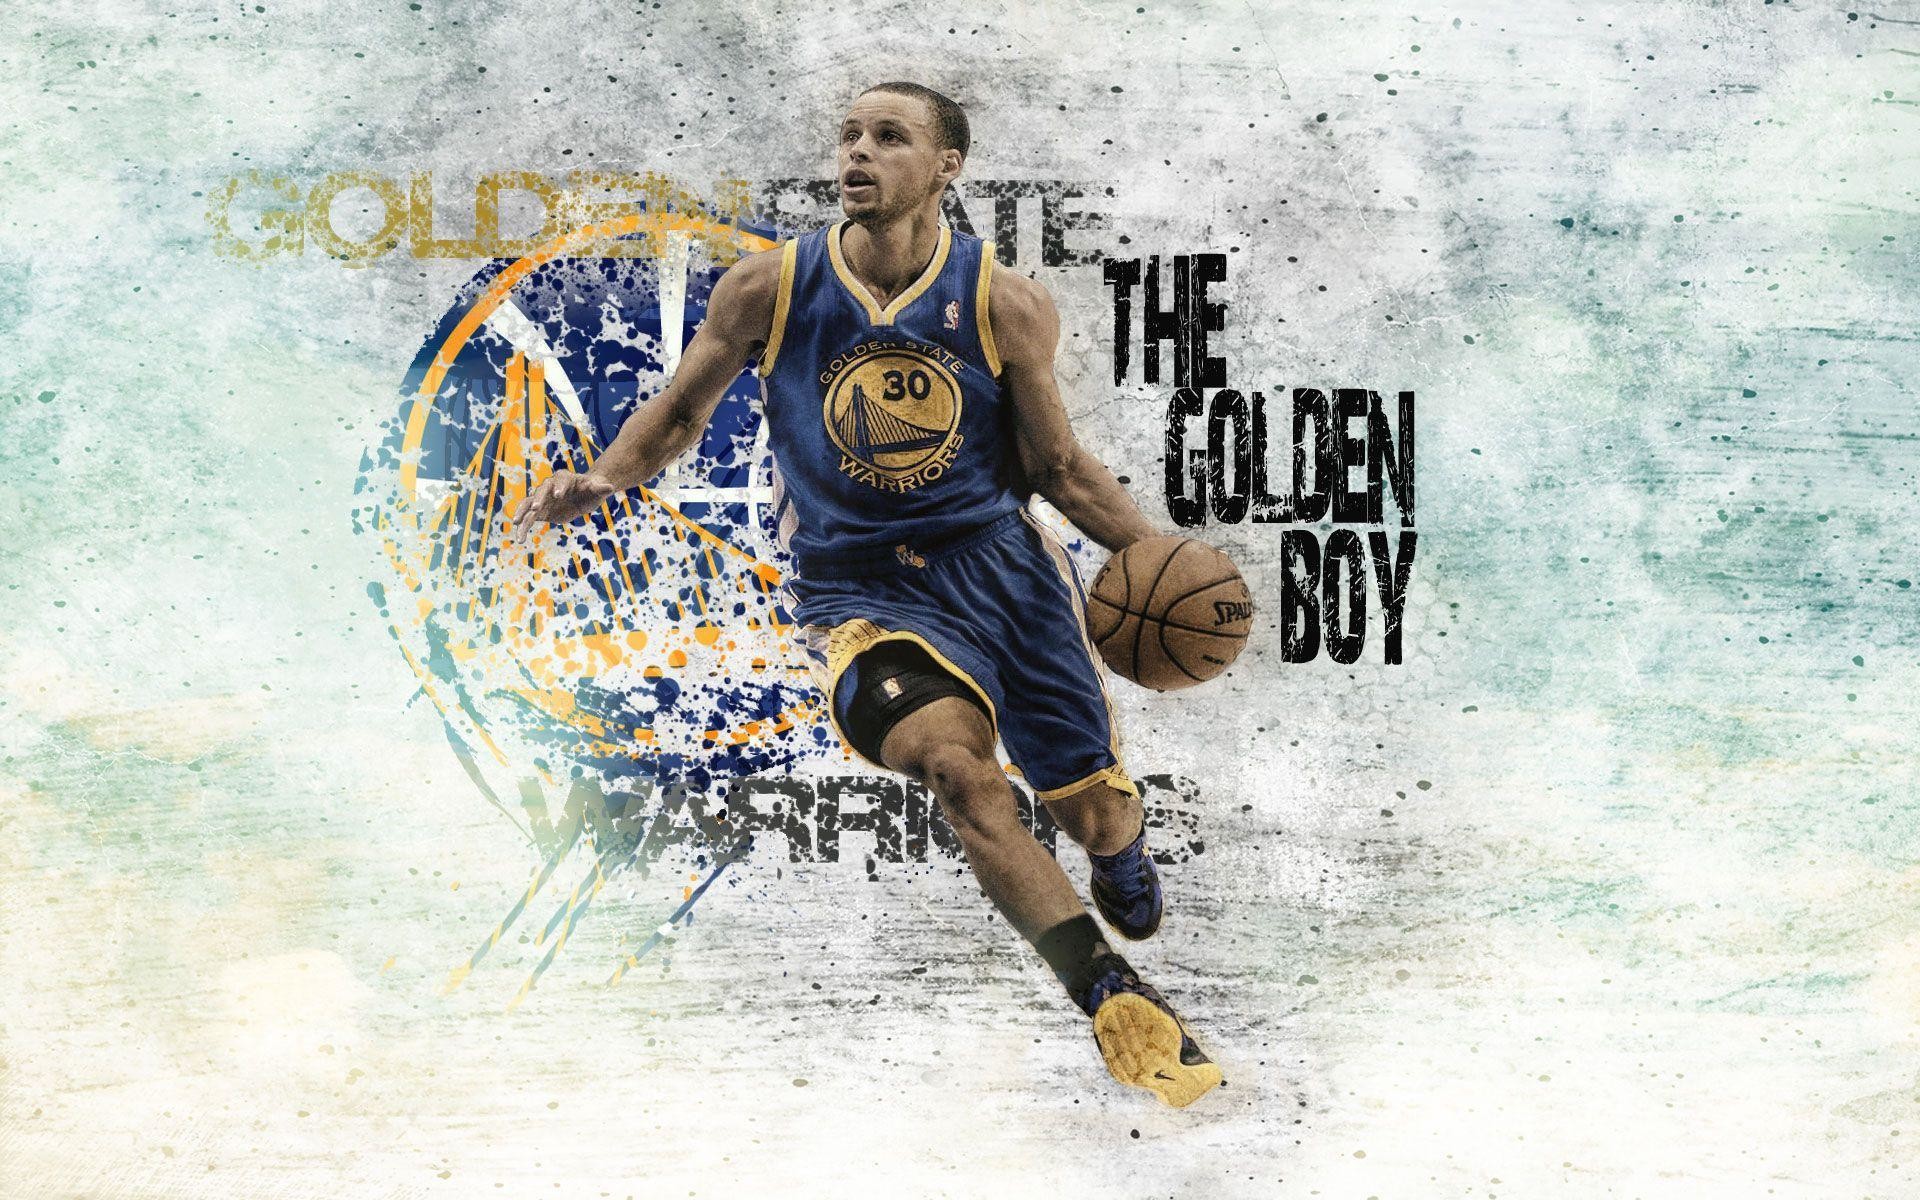 1920x1200 Stephen Curry wallpaper free download | Wallpapers, Backgrounds .